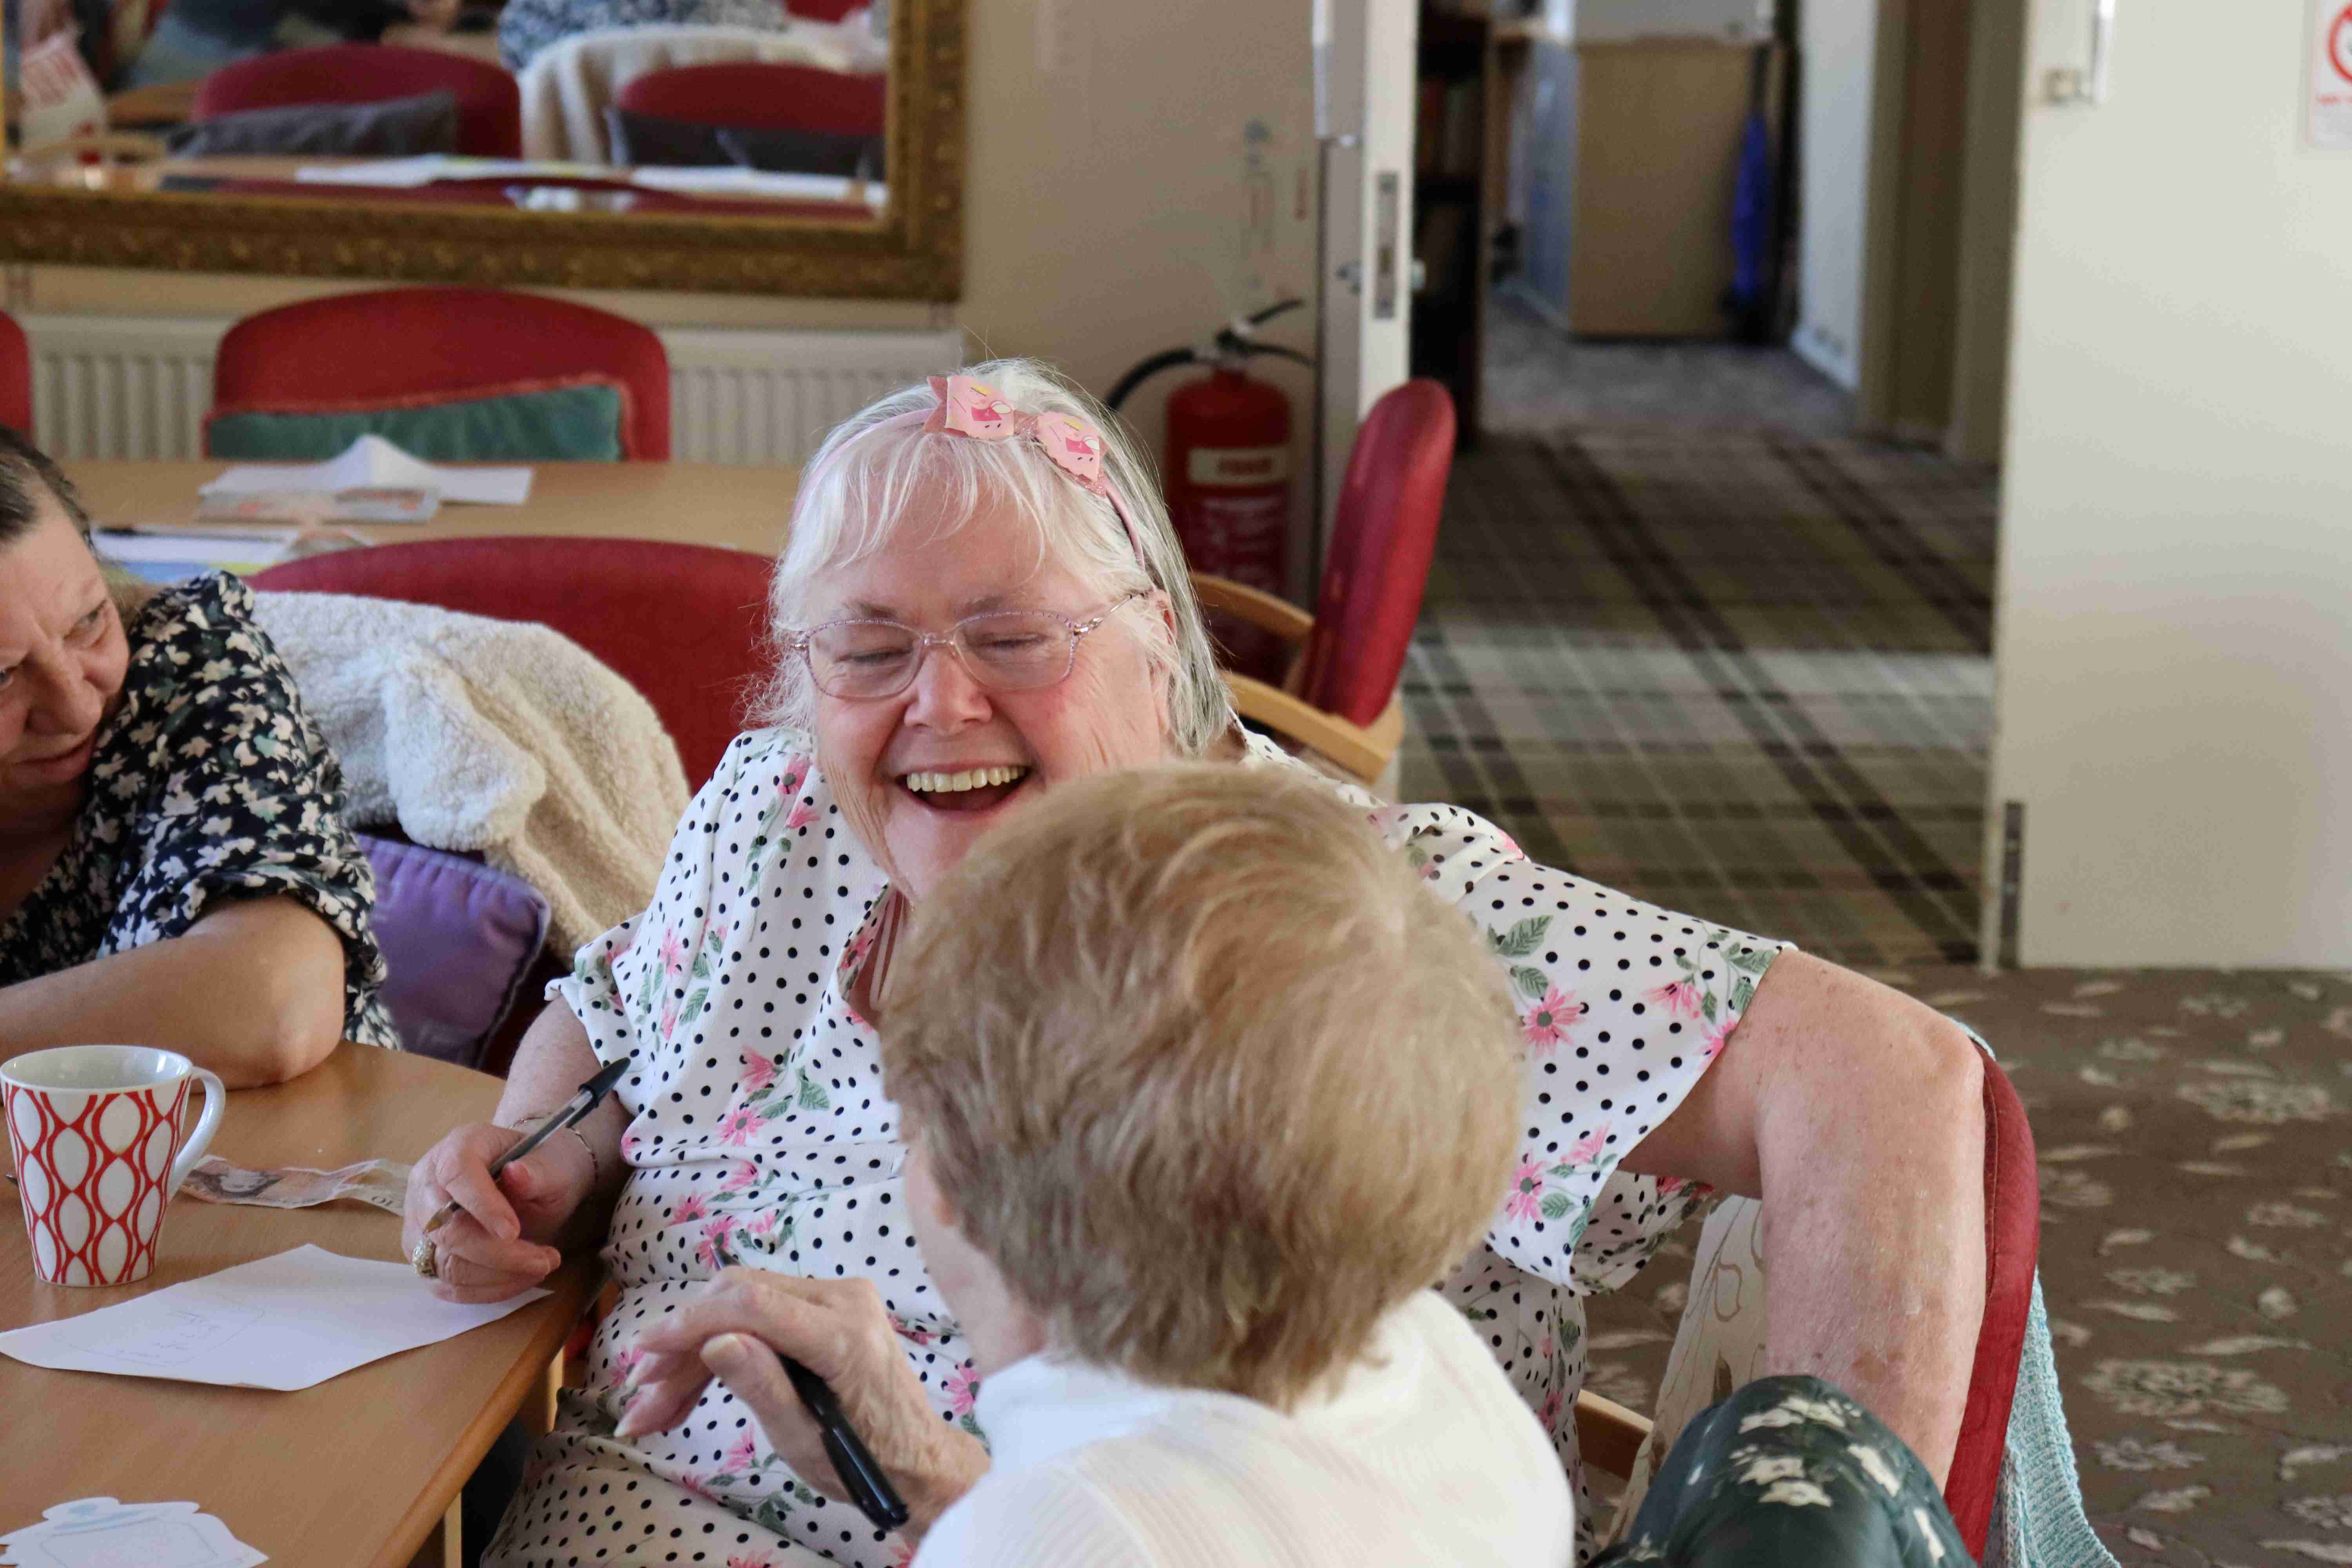 Reducing social isolation in older people